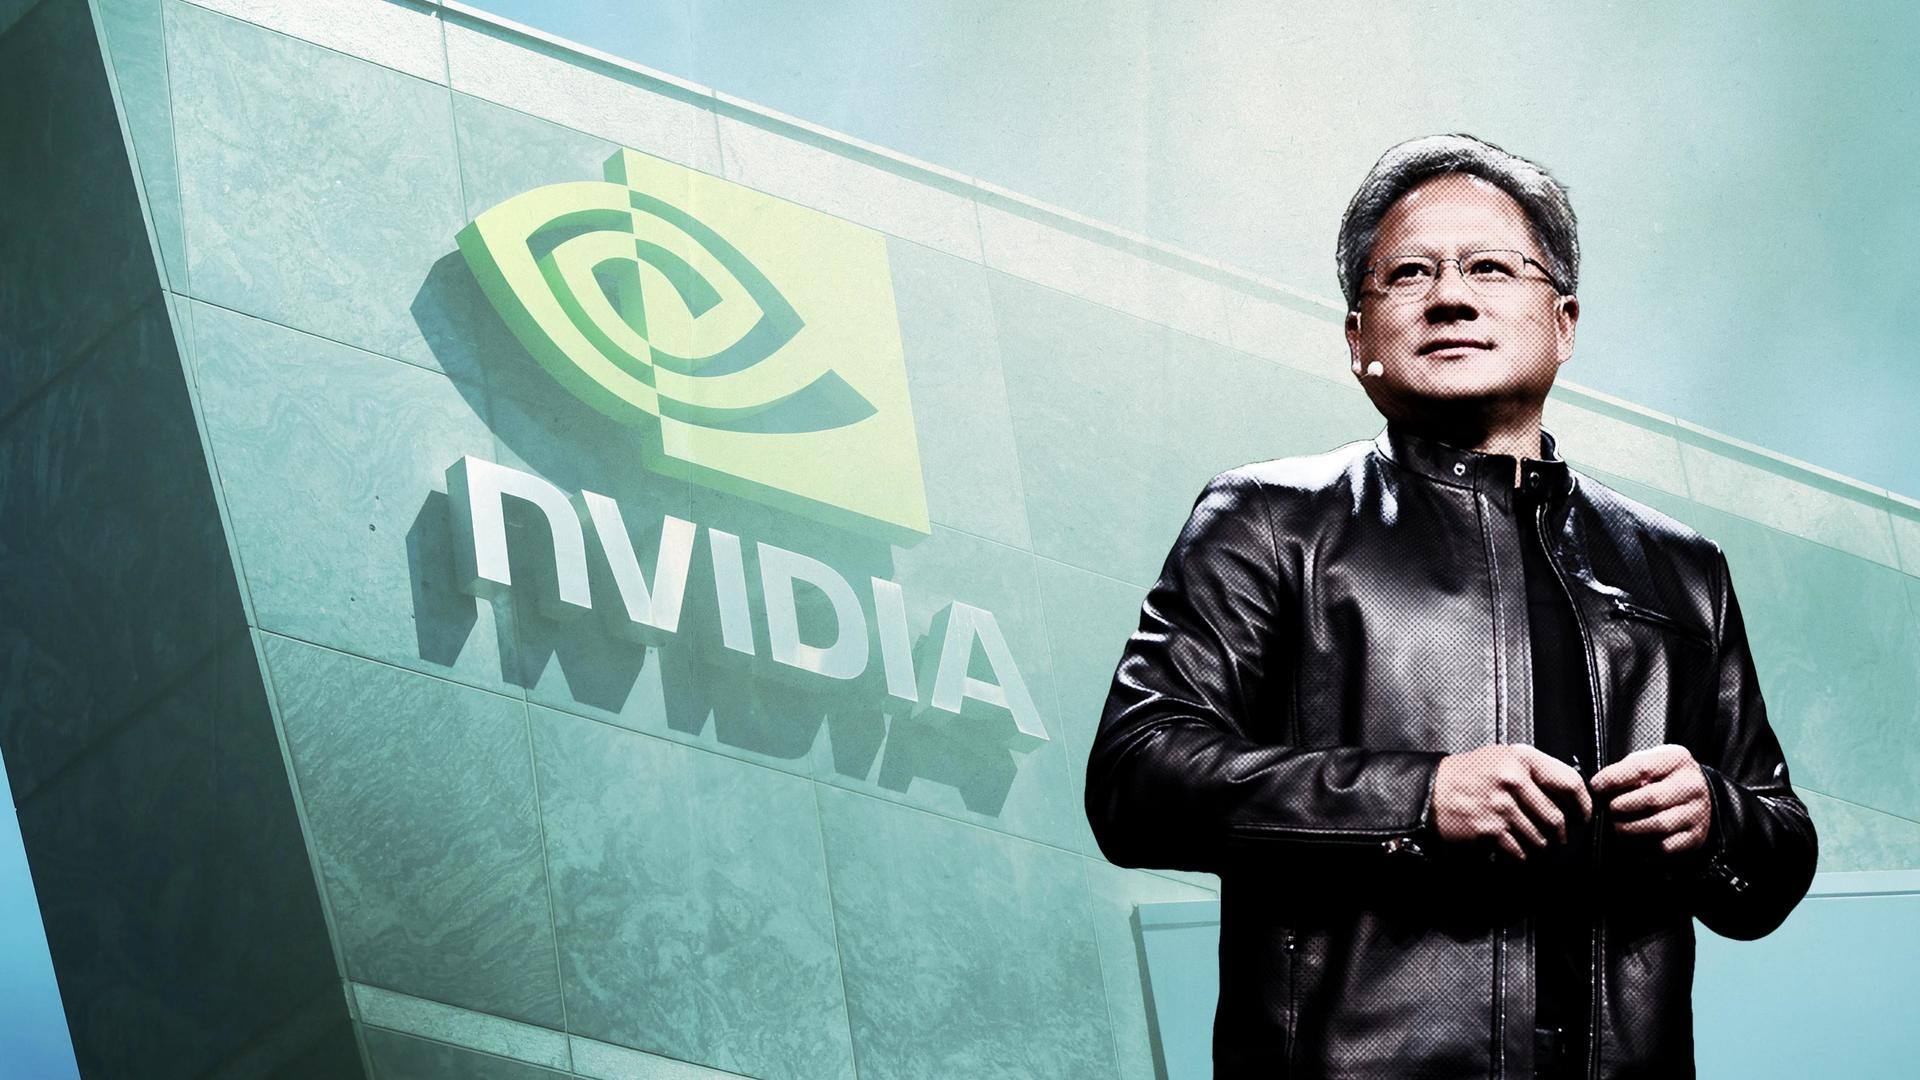 NVIDIA's Jensen Huang's wealth doubled this year: Who is he